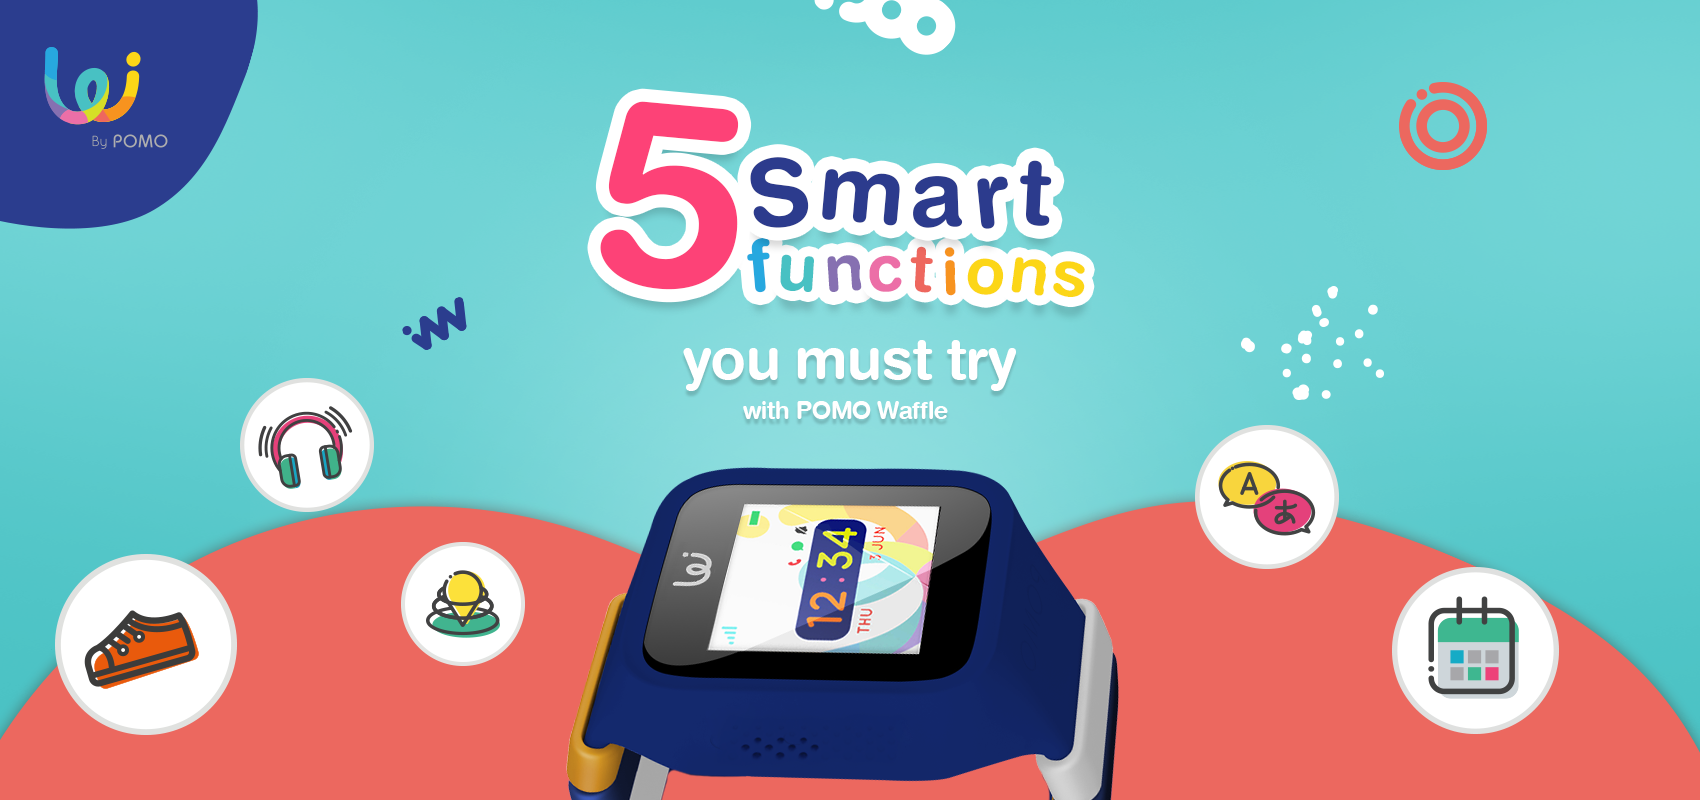 5 Smart Functions You Must Try with POMO Waffle